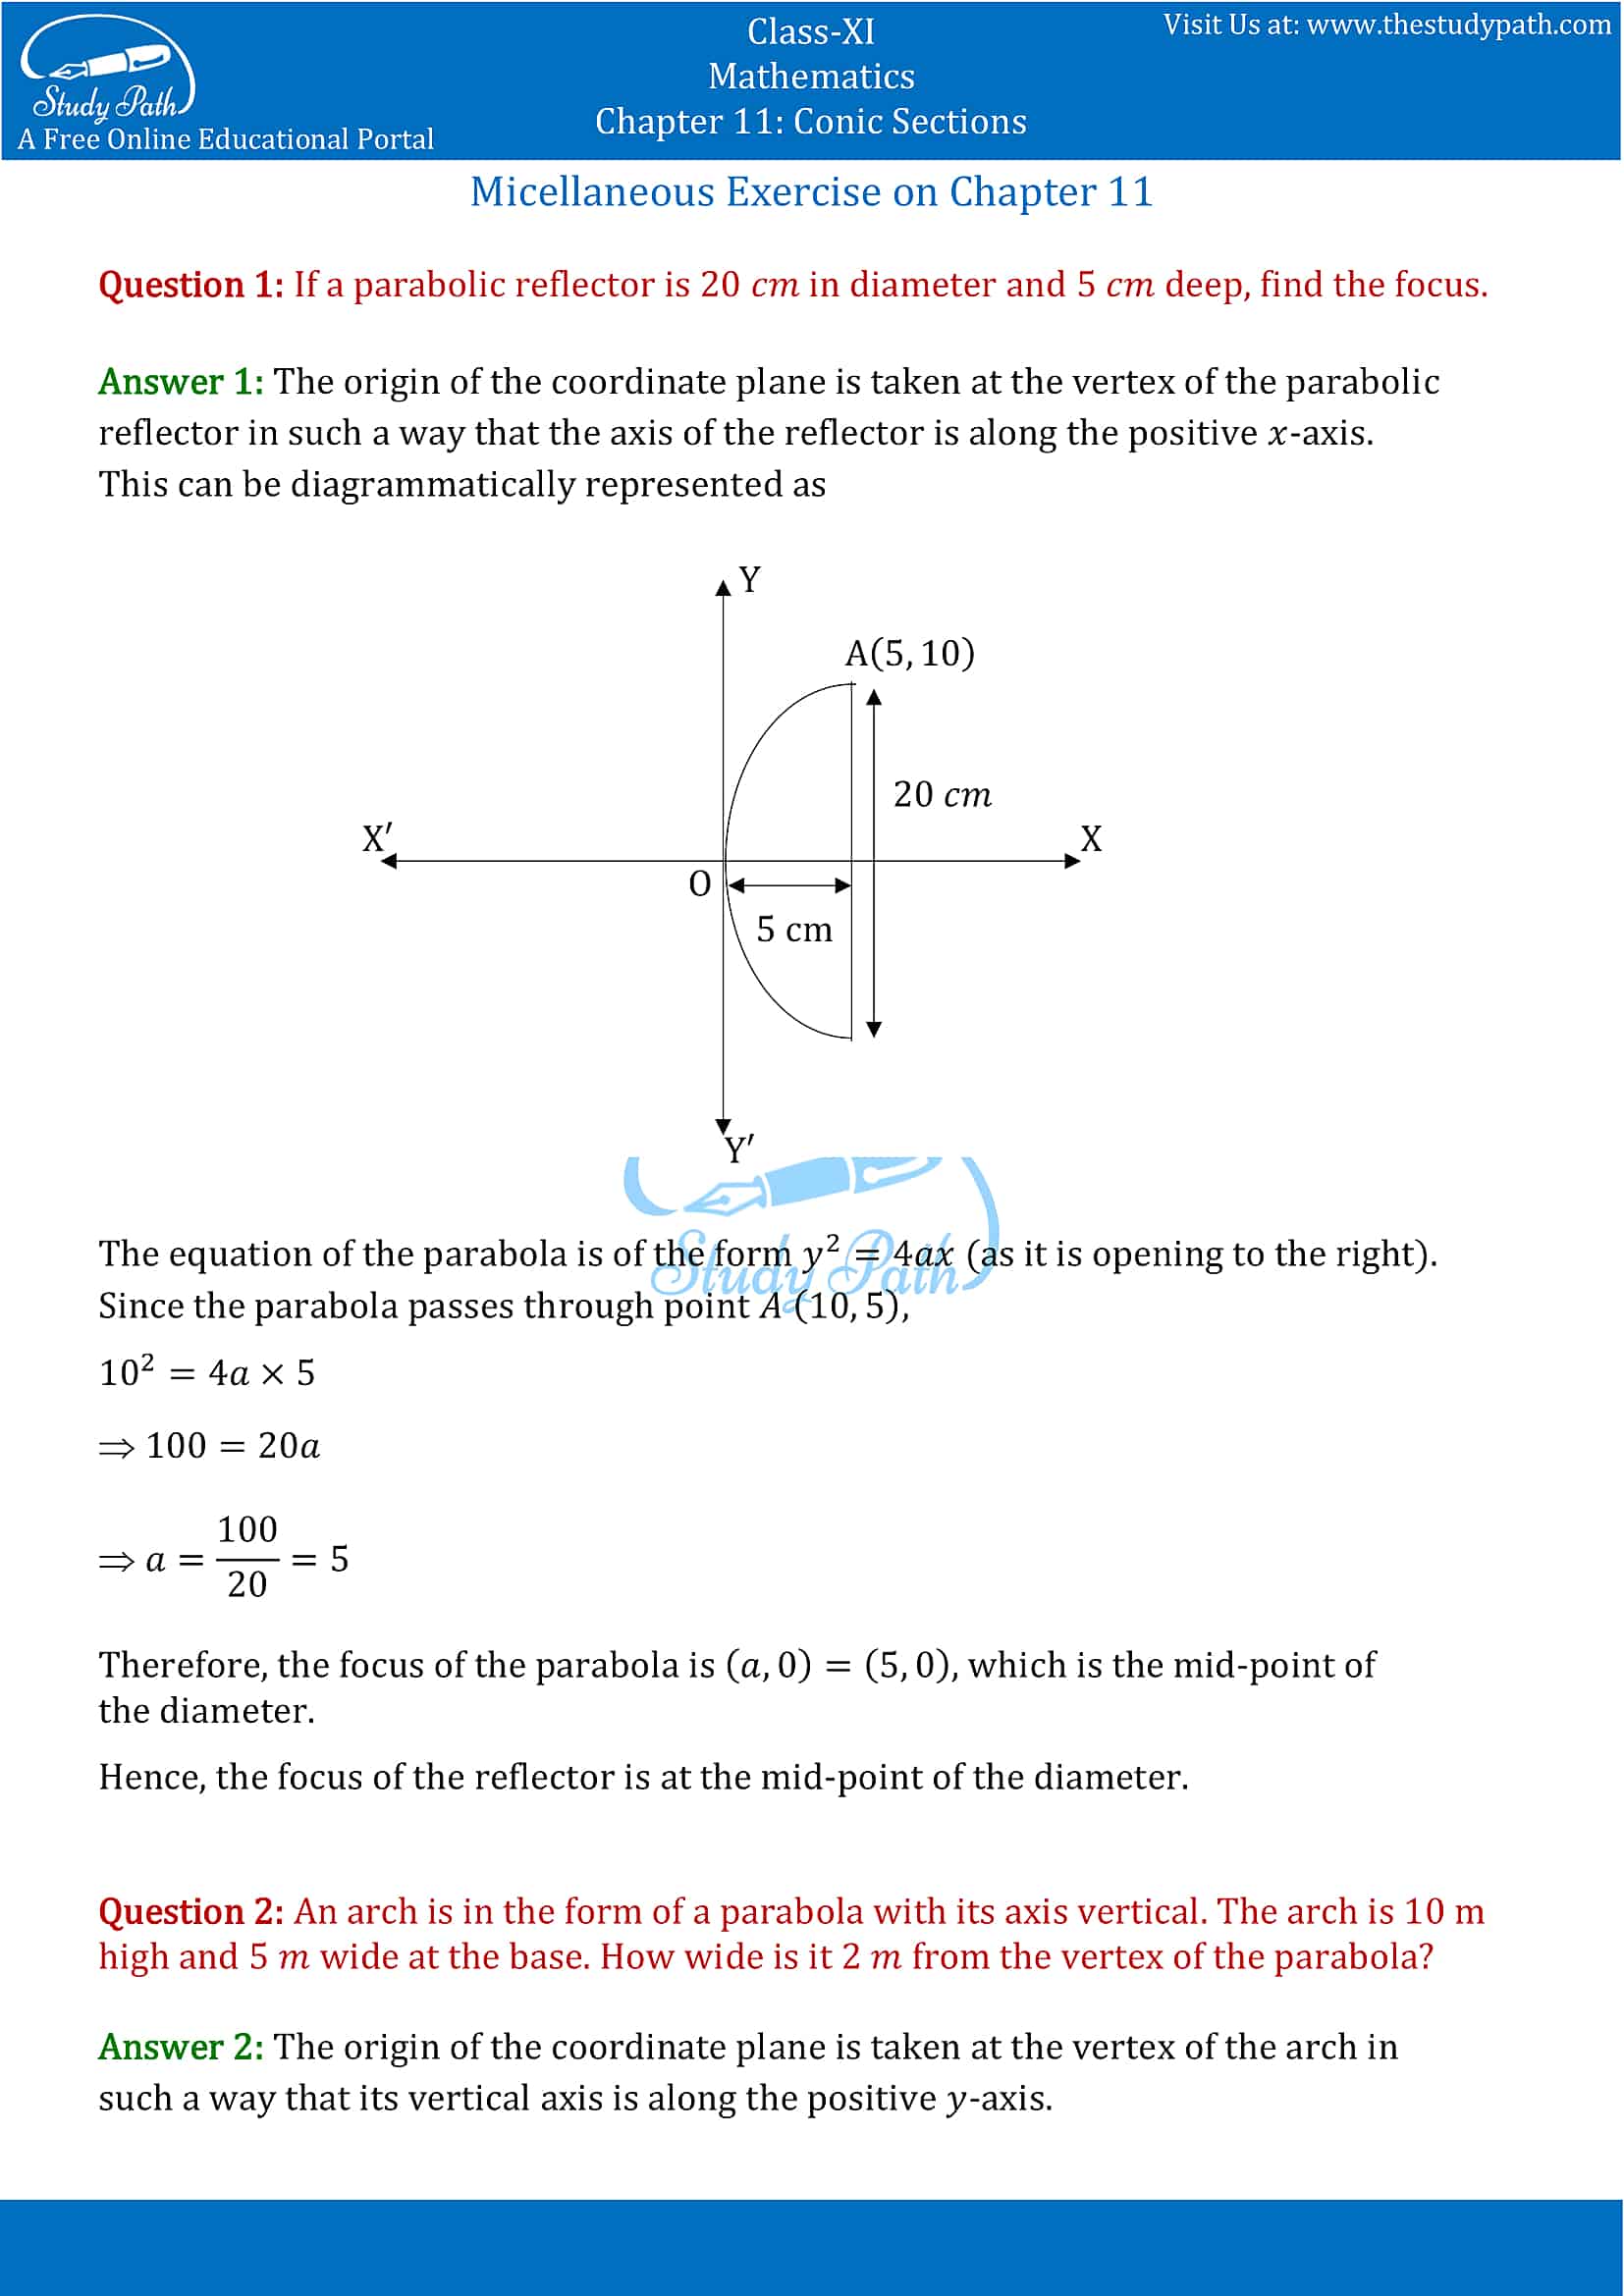 NCERT Solutions for Class 11 Maths chapter 11 Conic Section Miscellaneous Exercise Part-1